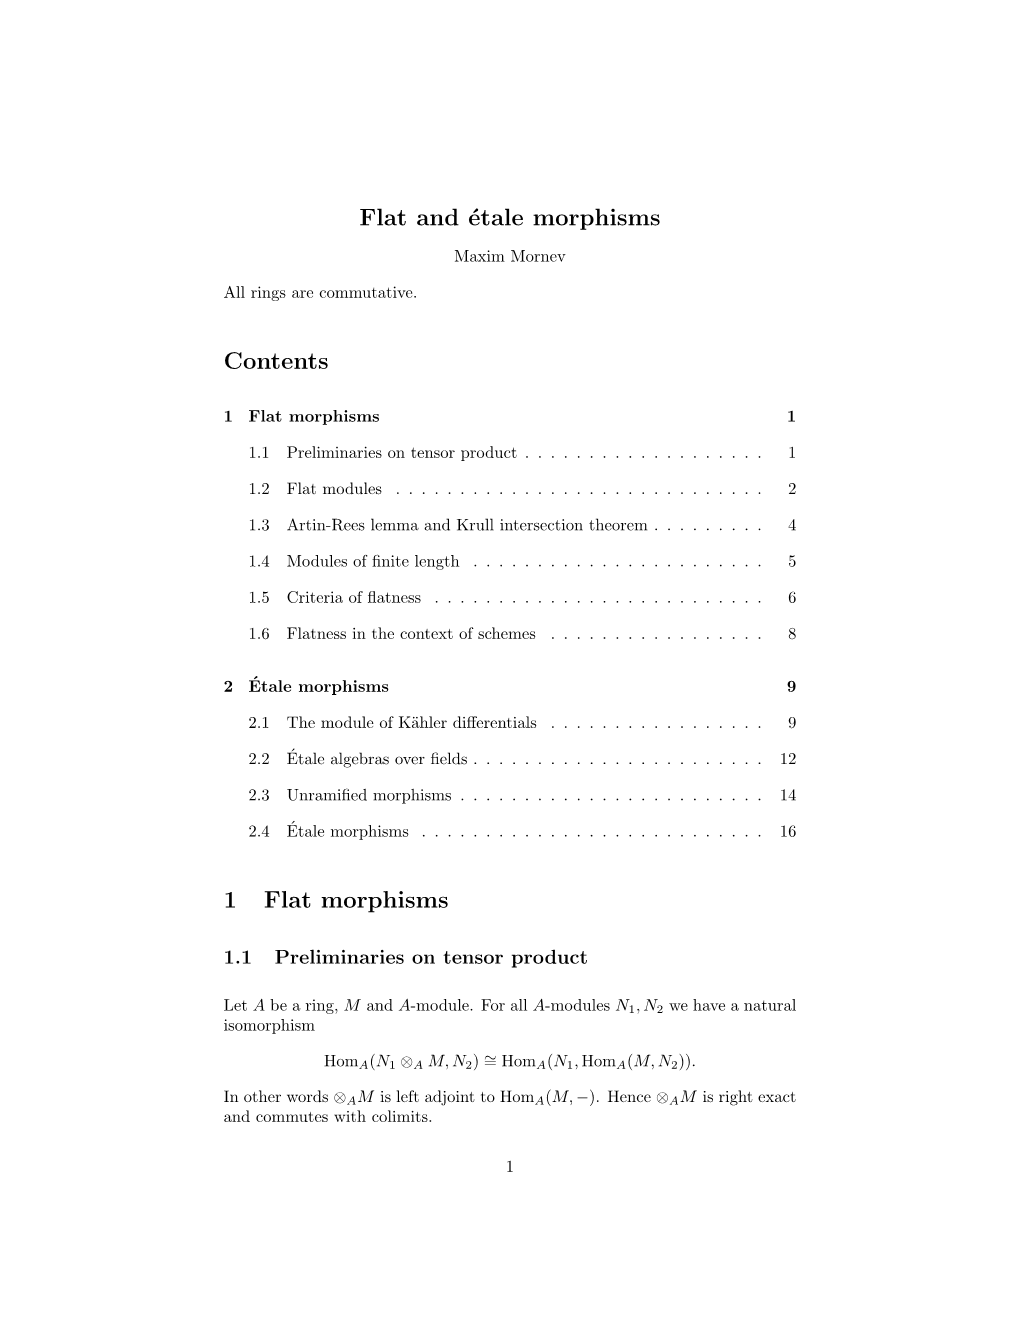 Flat and Étale Morphisms Contents 1 Flat Morphisms